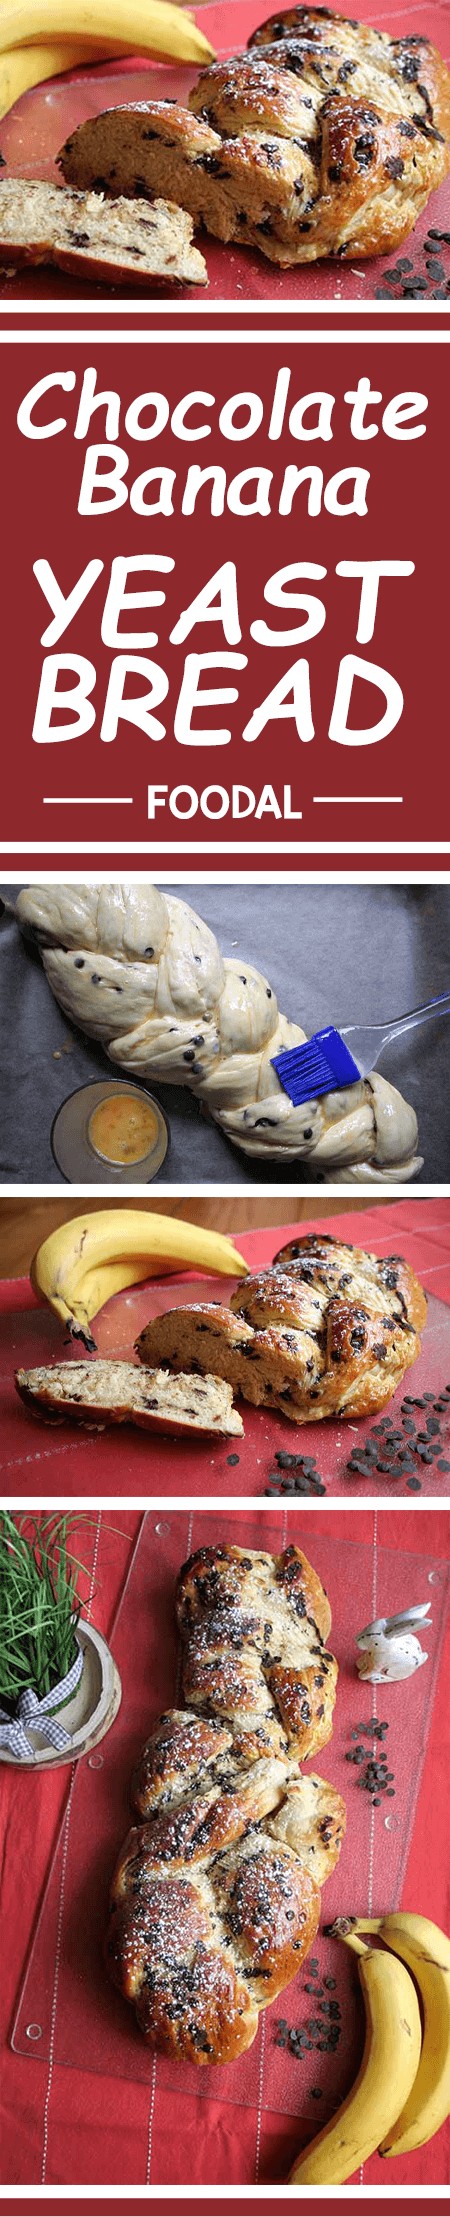 A fluffy slice of braided bread? It’s always a winner – especially for breakfast! This one combines the irresistible flavors of banana and chocolate, a duo that kids and adults of all ages will love. Enjoy it whenever you crave a sweet, delicious treat in the morning… or afternoon…or evening…you get the picture. https://foodal.com/recipes/breads/chocolate-banana-yeast-bread/